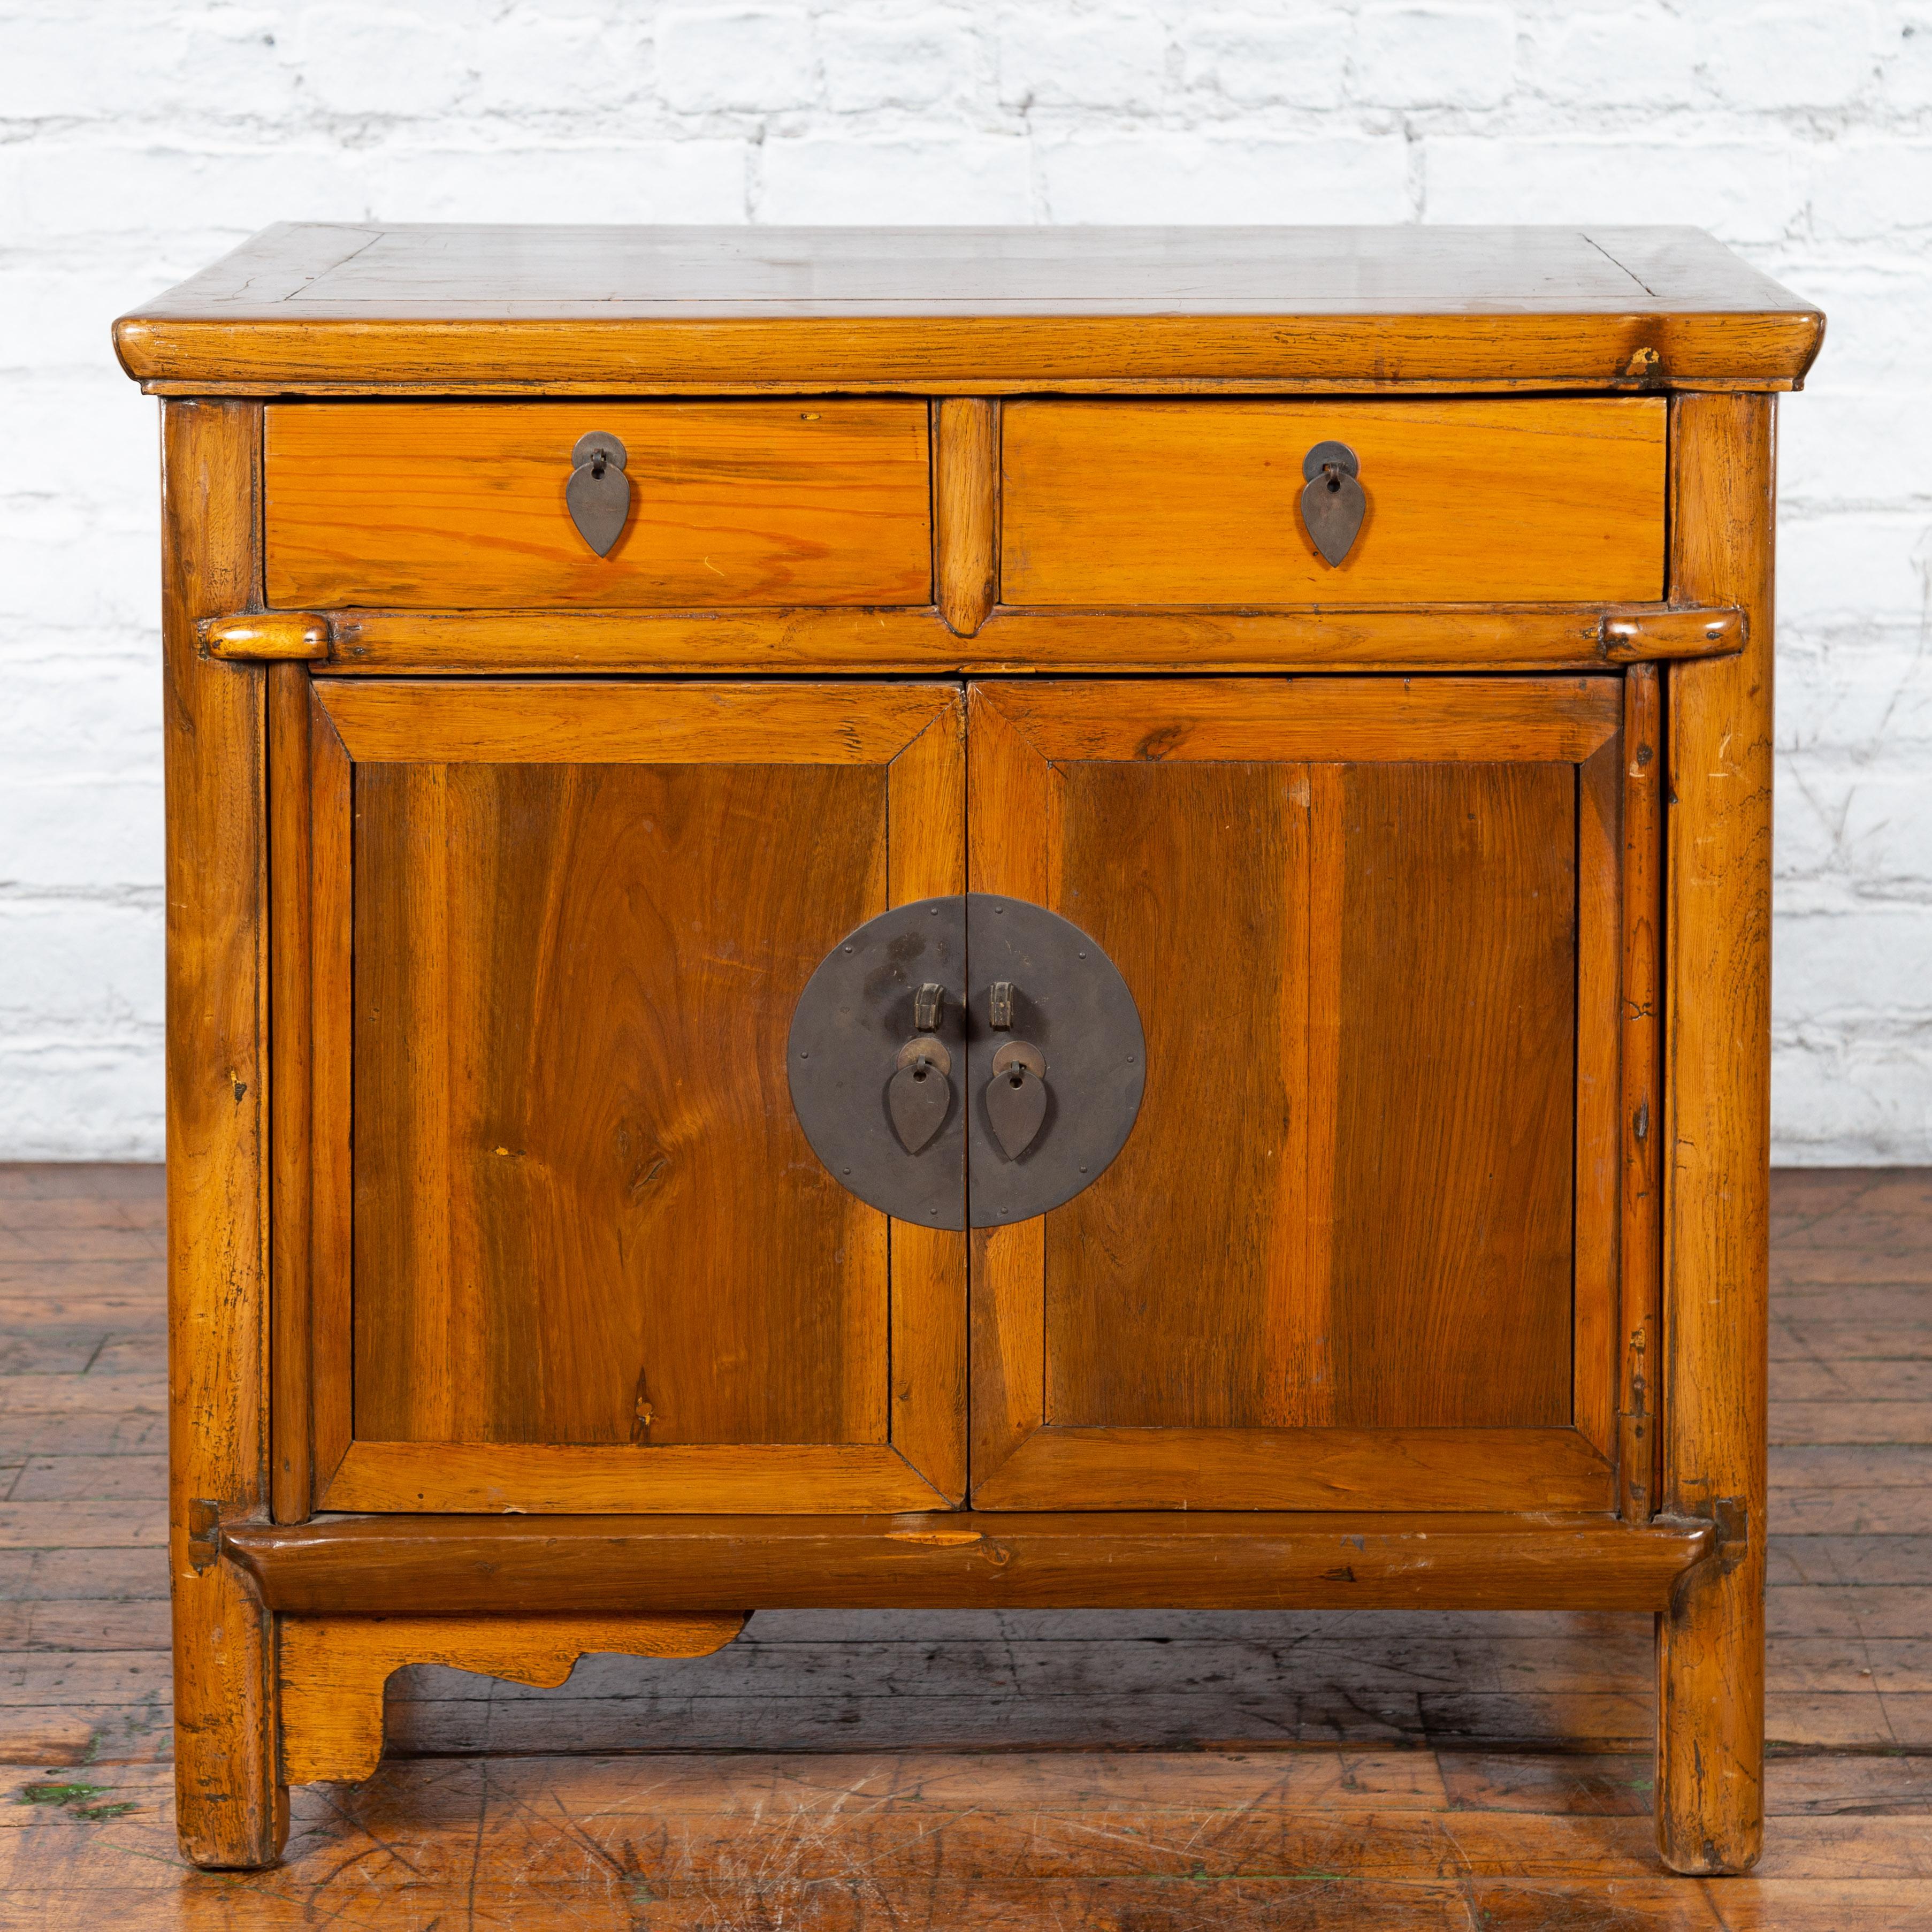 A Chinese elmwood side chest from the early 20th century, with round bronze medallion hardware, two drawers over two doors. Created in China during the early years of the 20th century, this elmwood side chest features a rectangular top with central